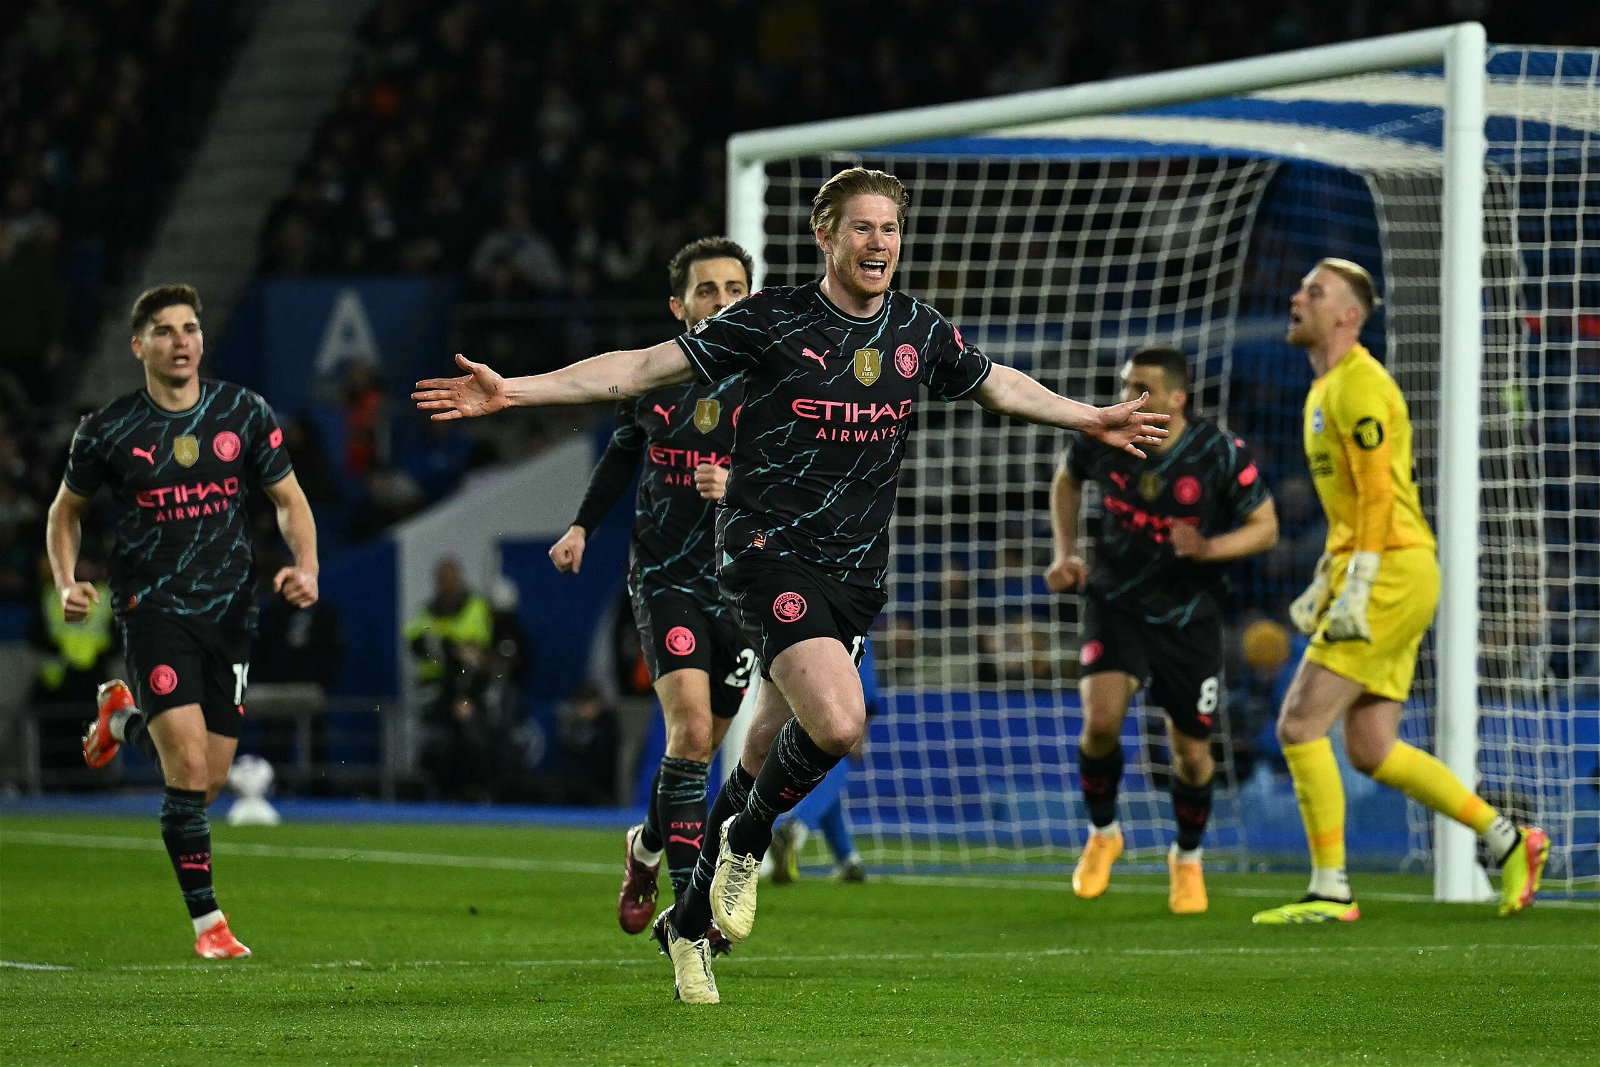 “It’s not something I am good at!” – Kevin De Bruyne reacts to record goal against Brighton